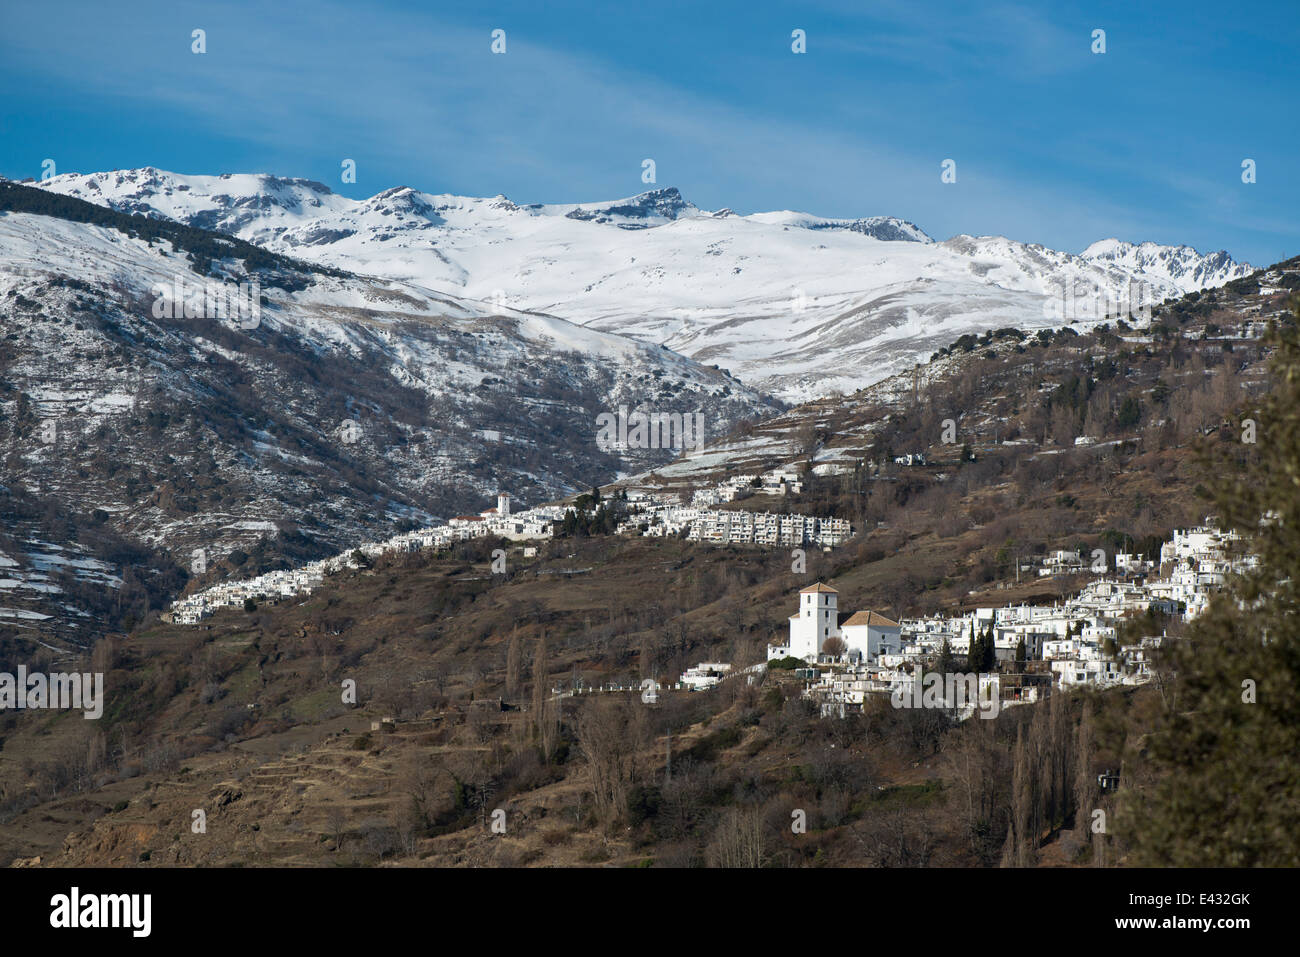 The high altitude villages of Capileira and Bubion lie in the Alpujarra mountains of Andalucia, Southern Spain Stock Photo